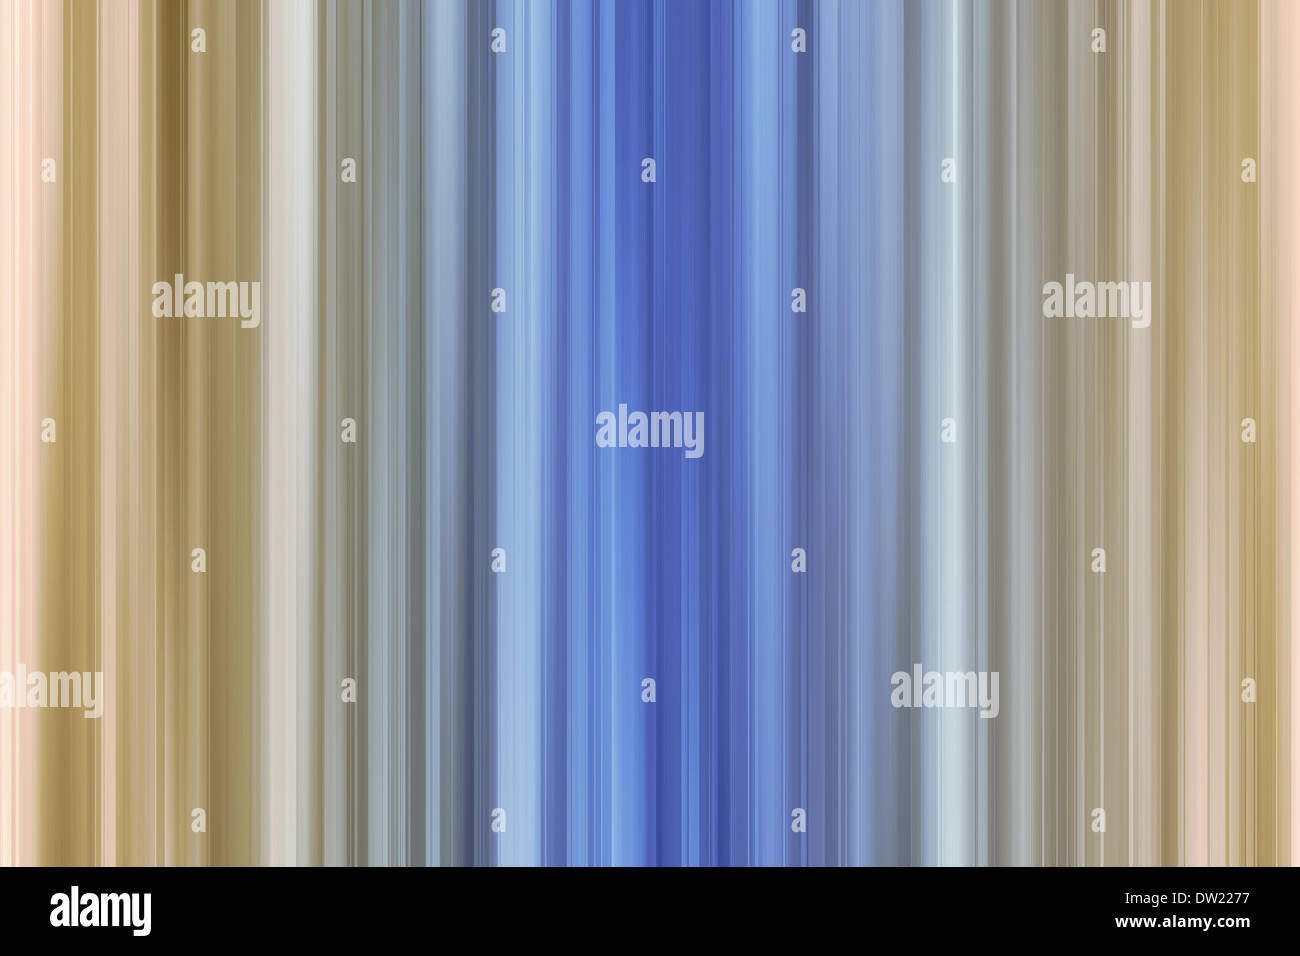 color bars background Stock Photo